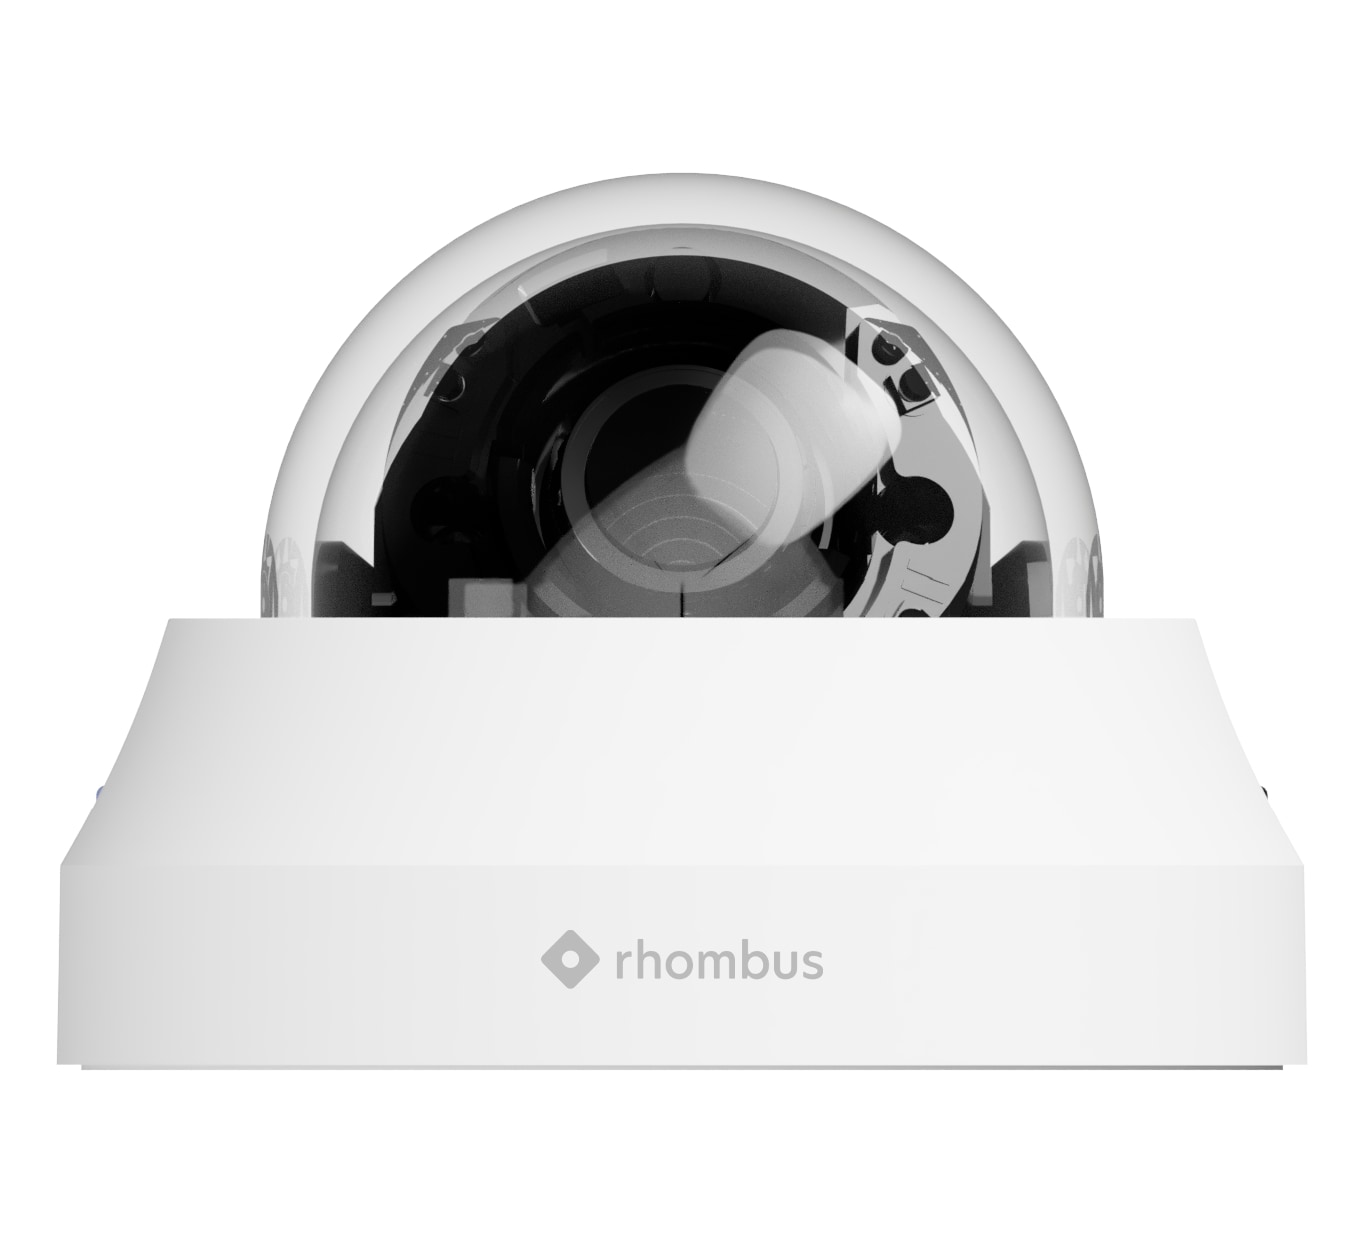 Rhombus R230 5MP WiFi Dome Camera with Onboard Storage of 128GB or 20 Days